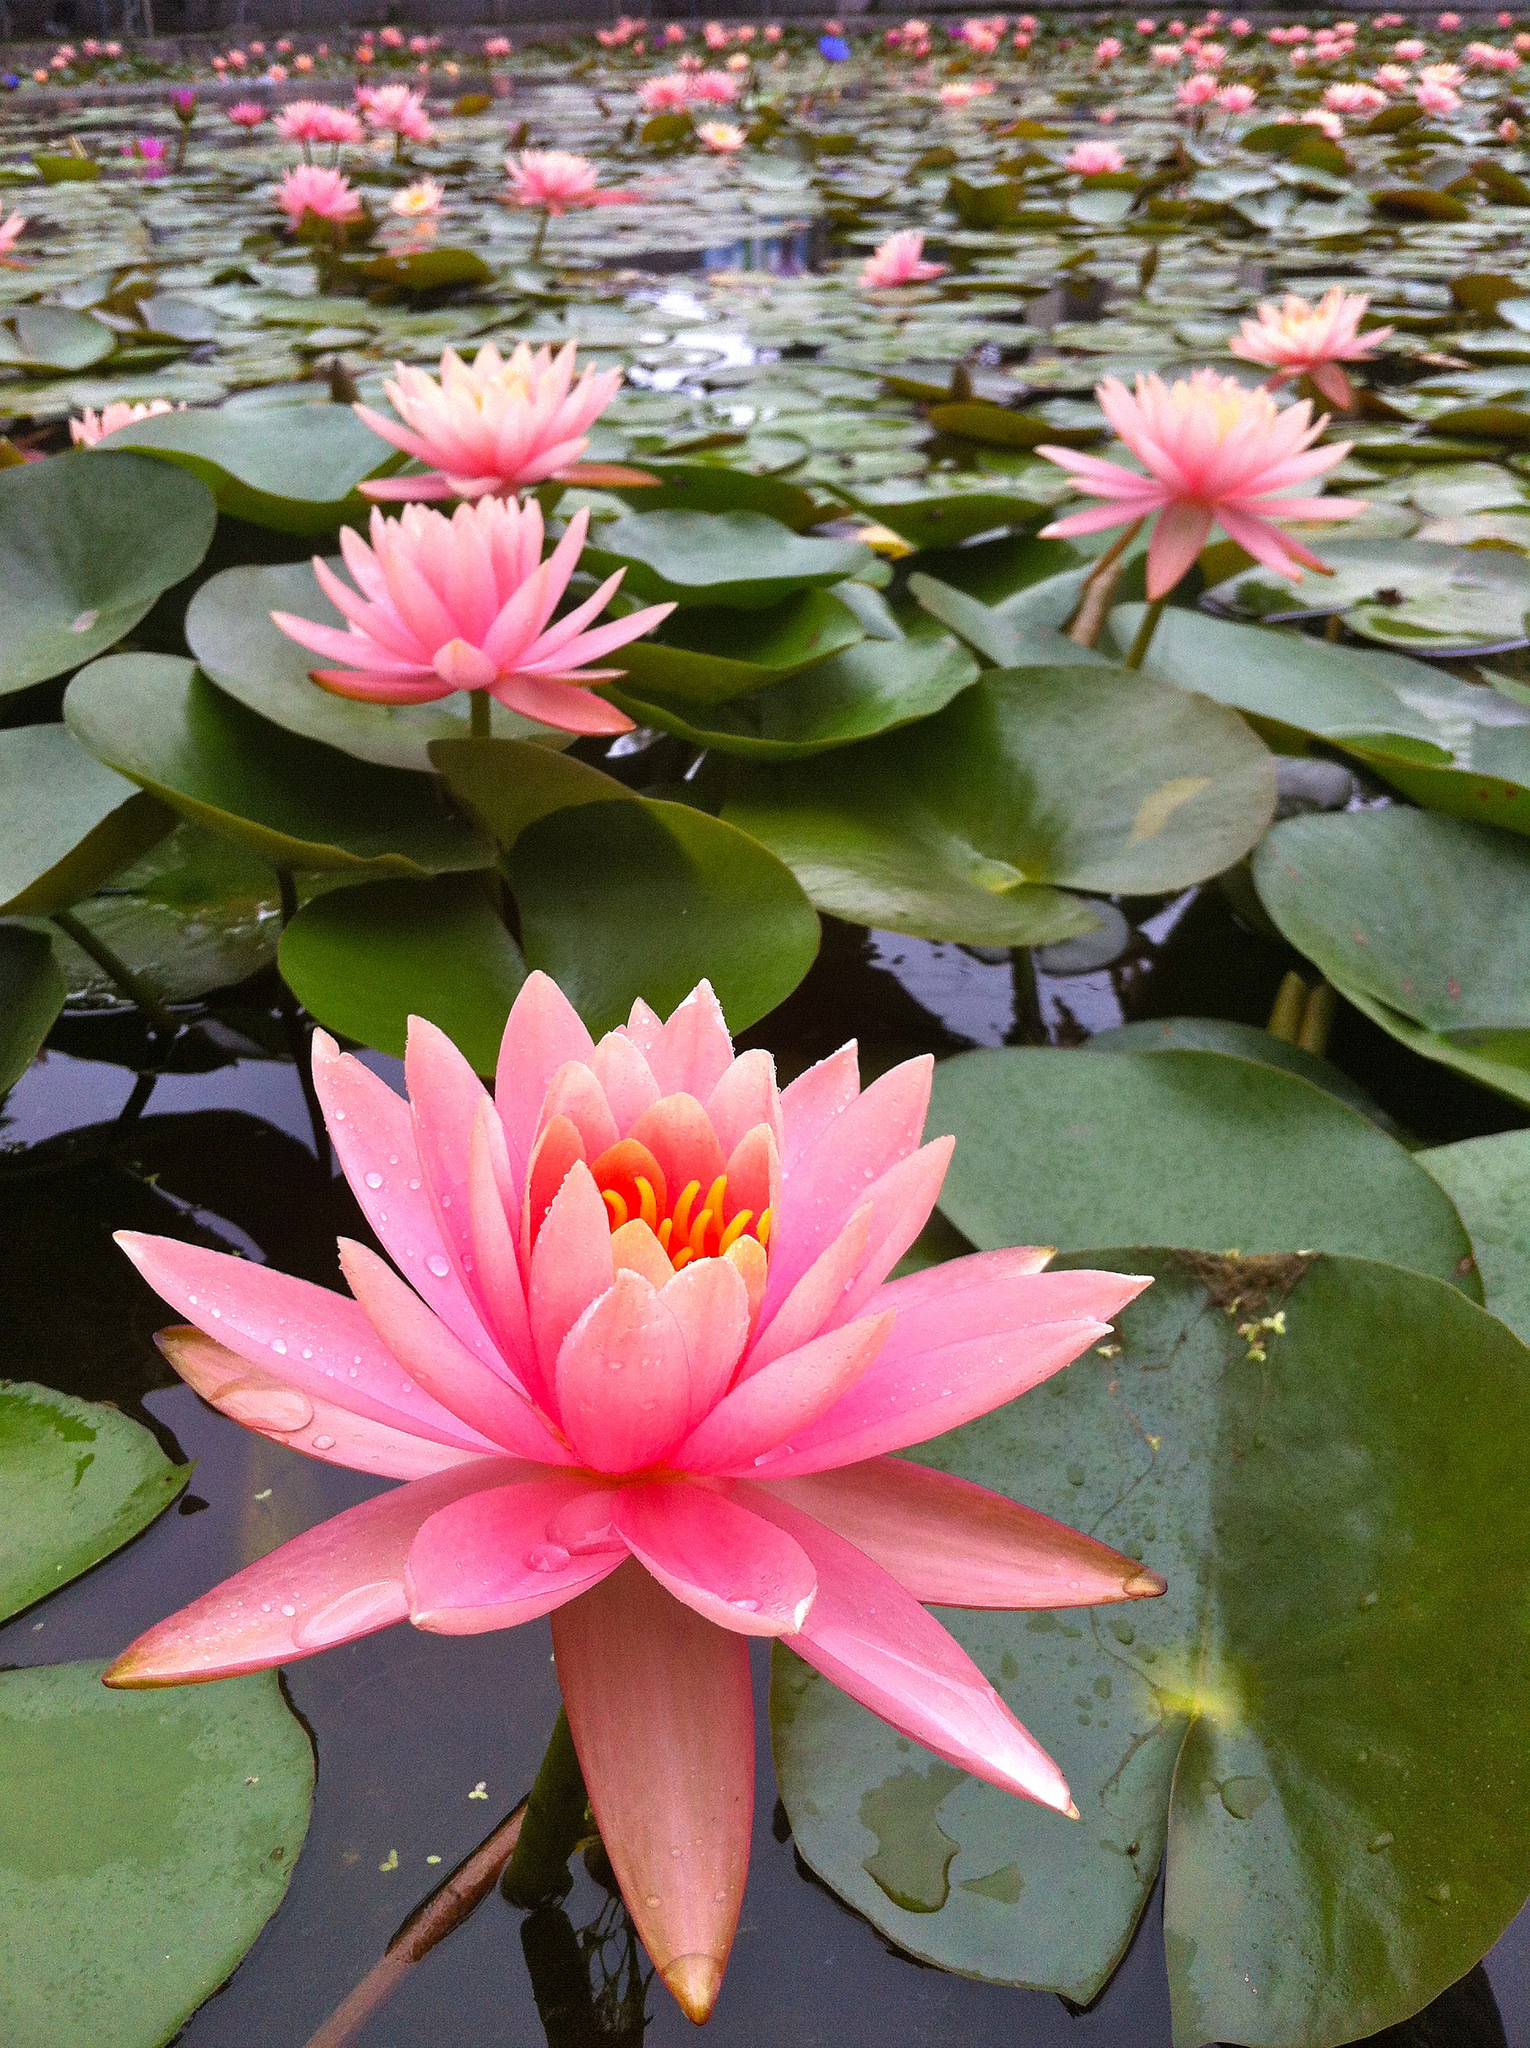 Lotus Pond in Kaohsiung - Attraction in Kaohsiung, Taiwan - Justgola